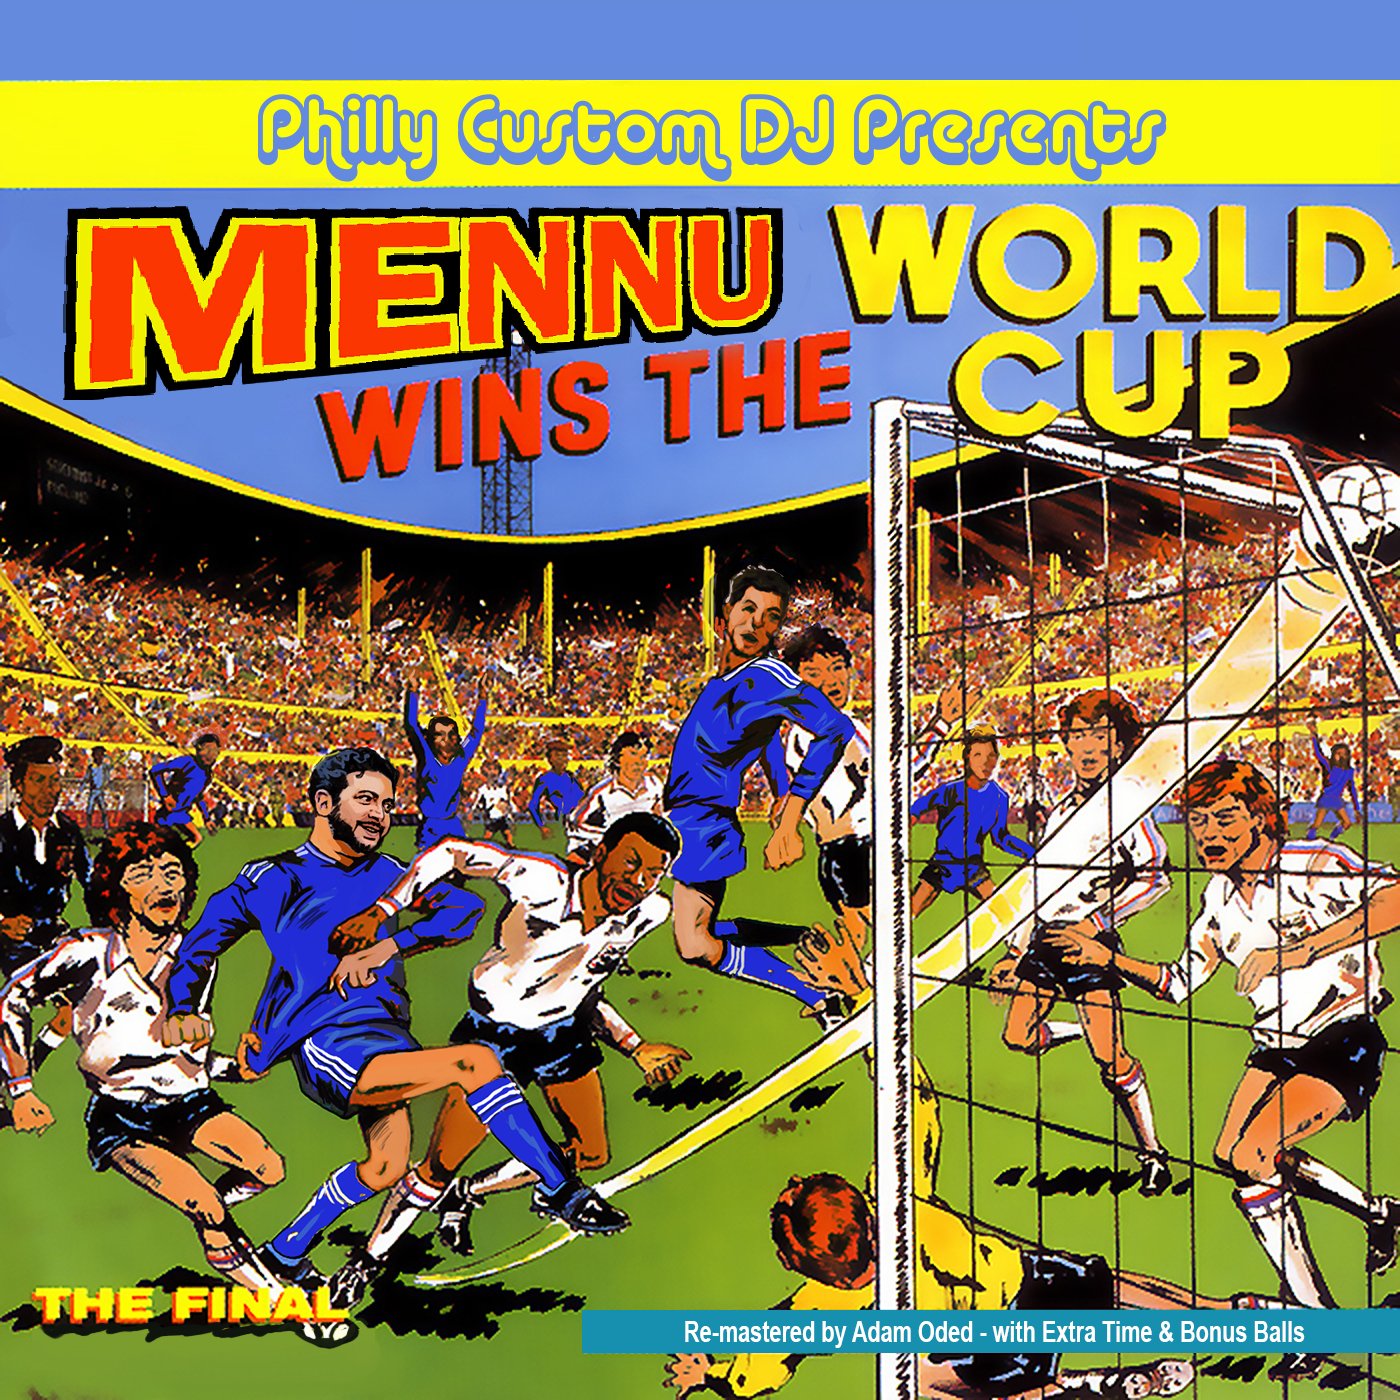 Mennu Wins The World Cup